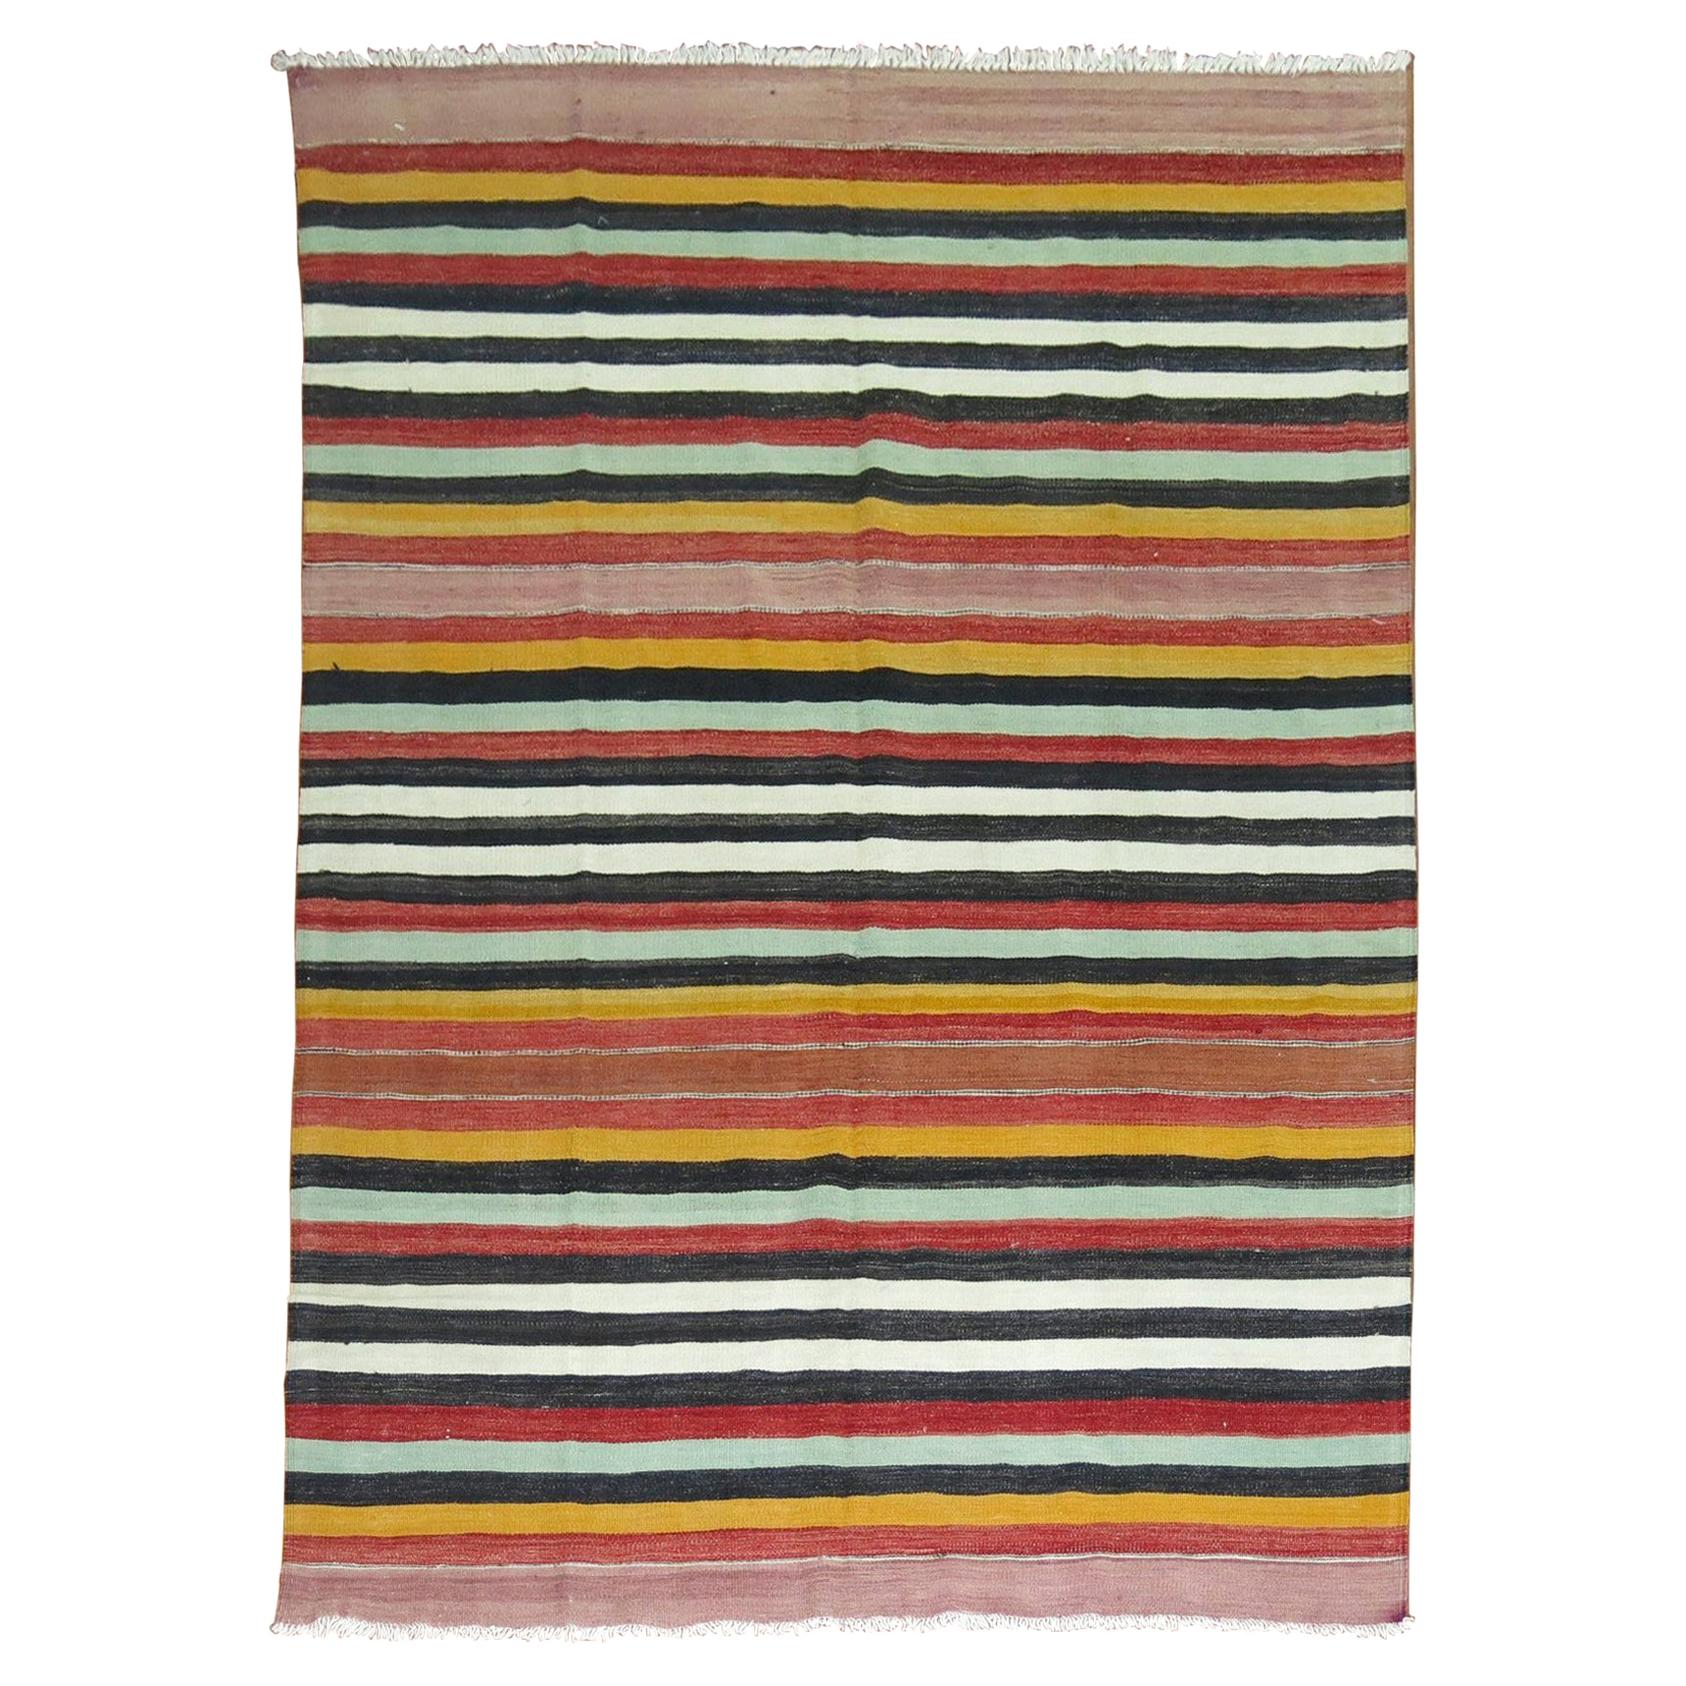 20th Century Colorful Kilim with Striped Motif